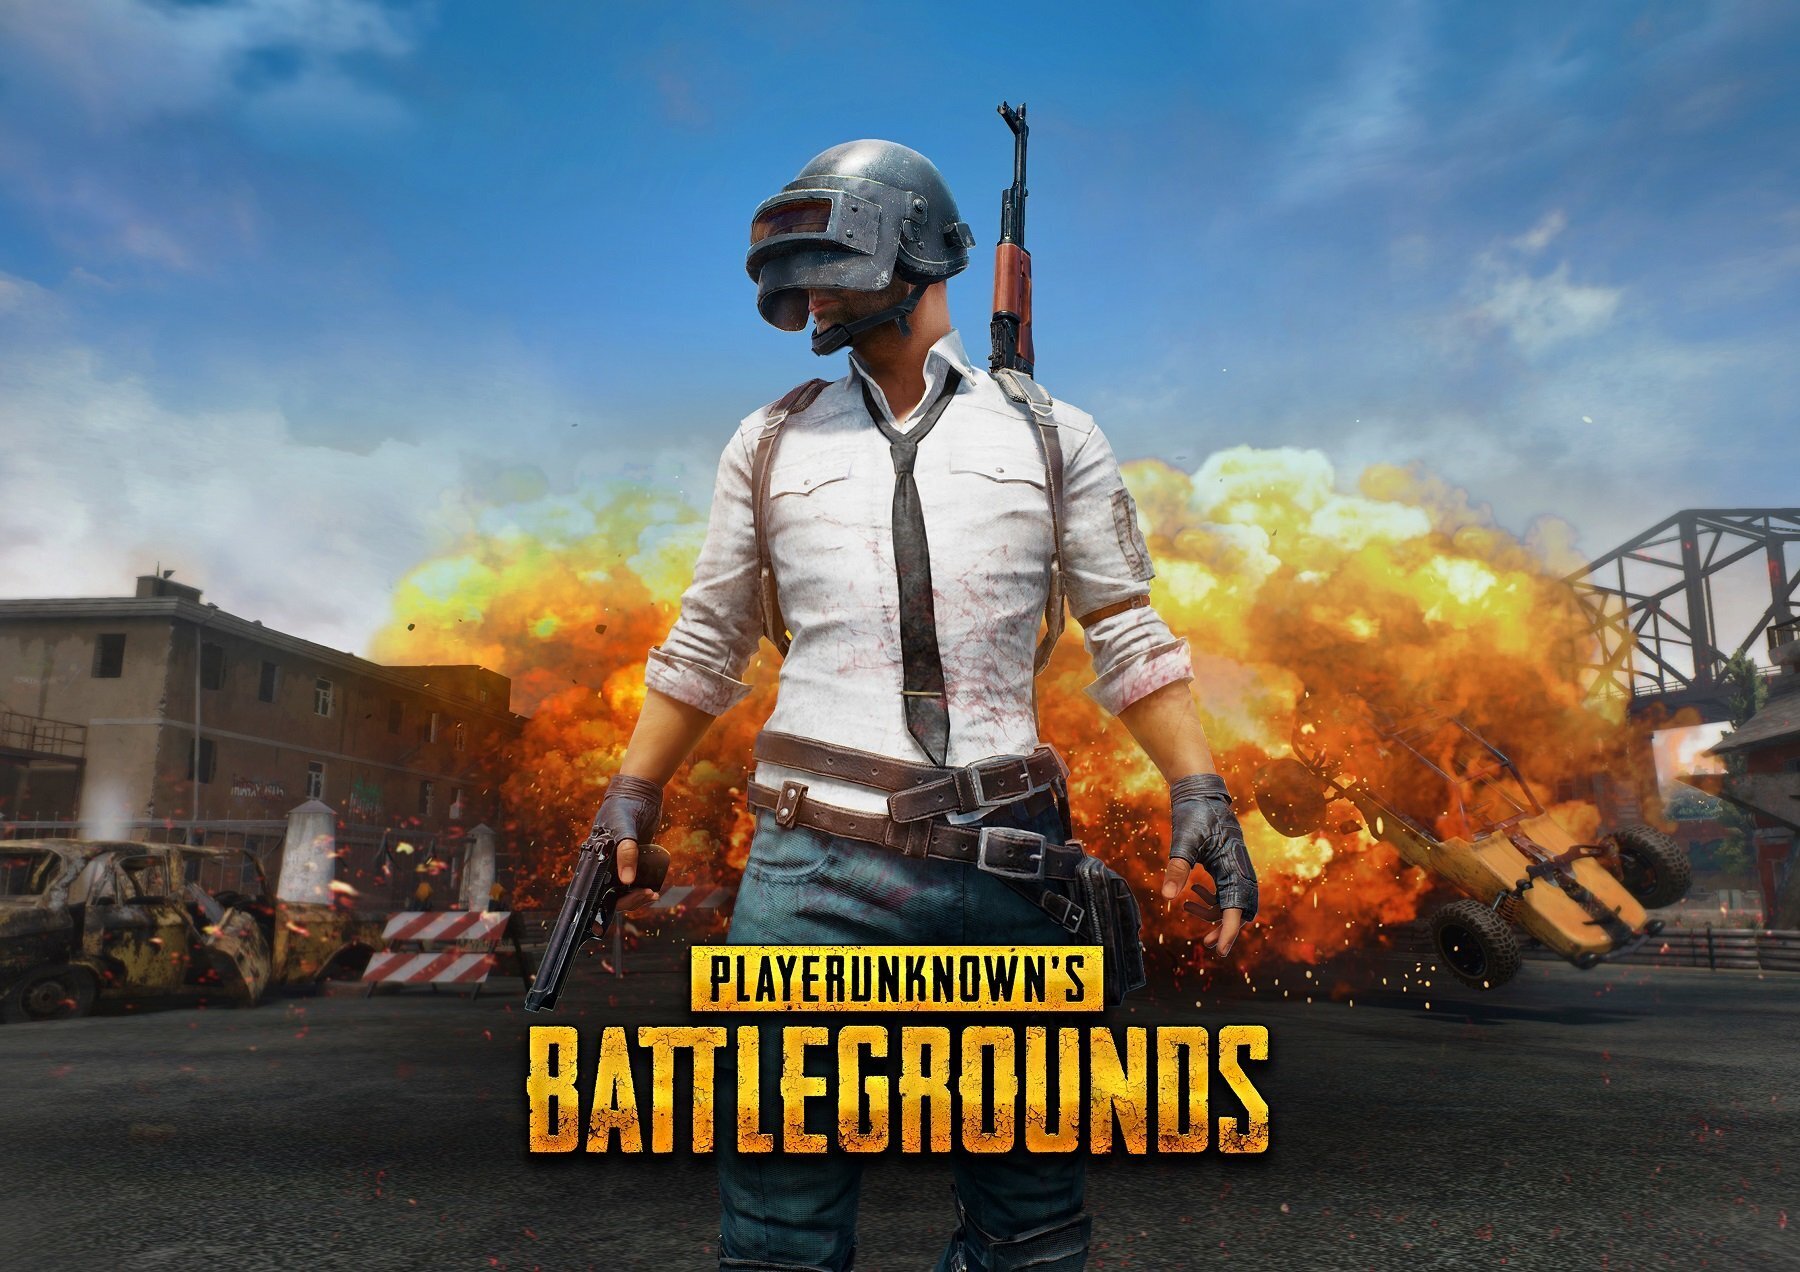 Iraq’s parliament voted to ban battle royale games such as PlayerUnknown’s Battleground and Fortnite citing the “negative” influence they have on youth.